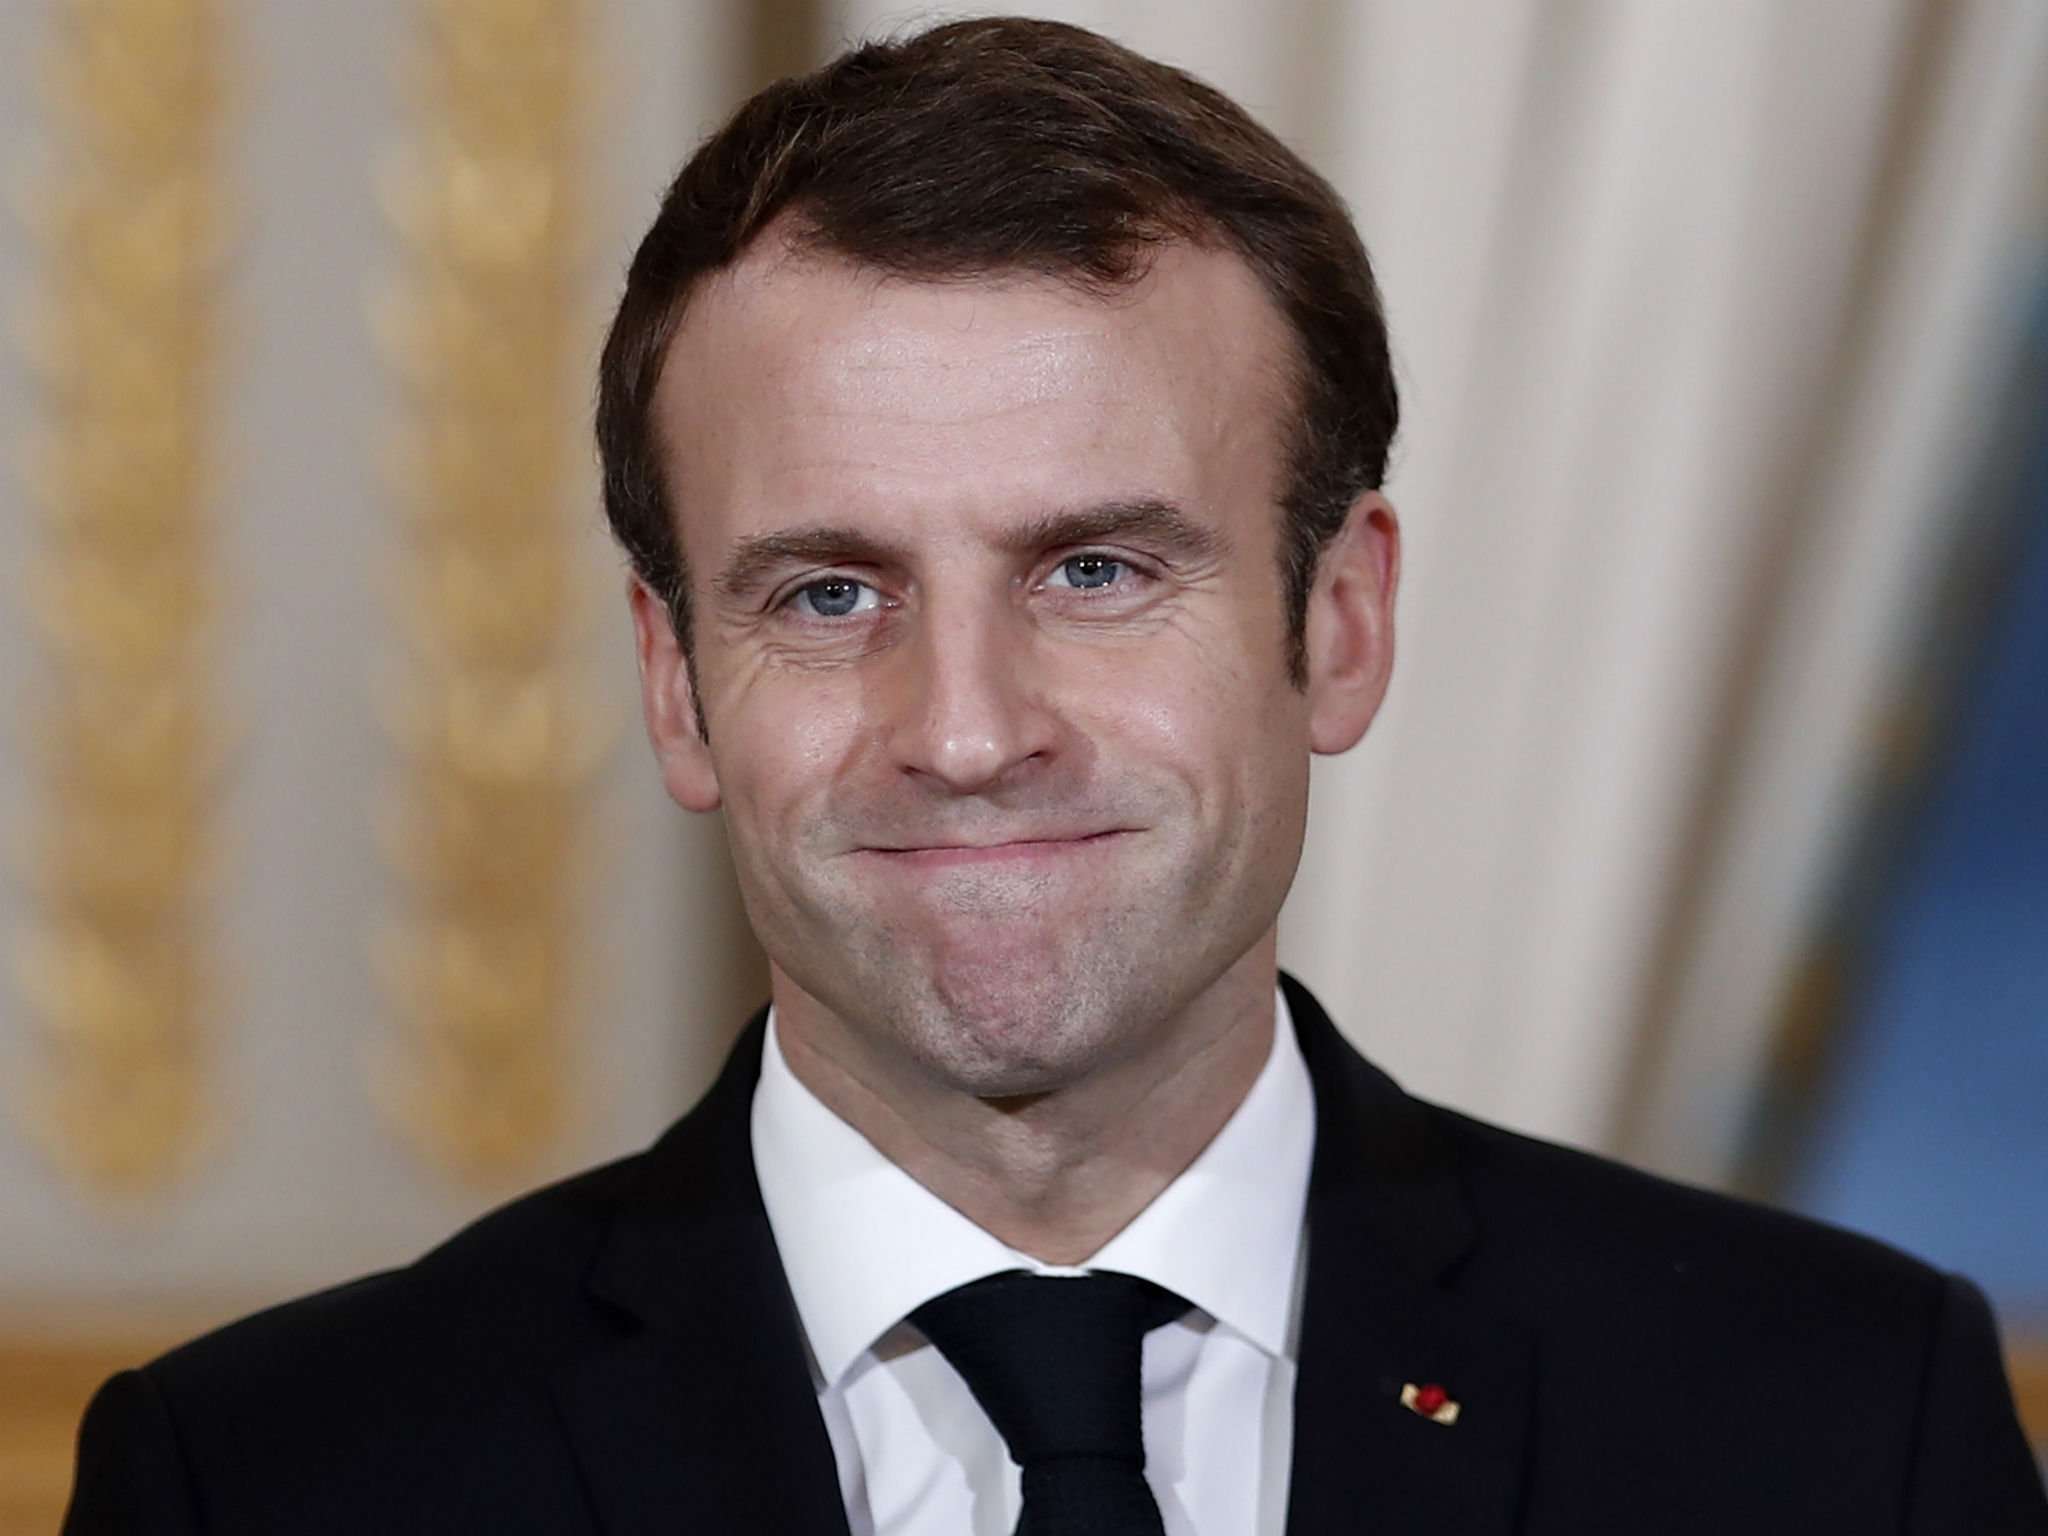 image for Trump rebuked by Macron over Syria troop withdrawal: ‘An ally should be dependable’